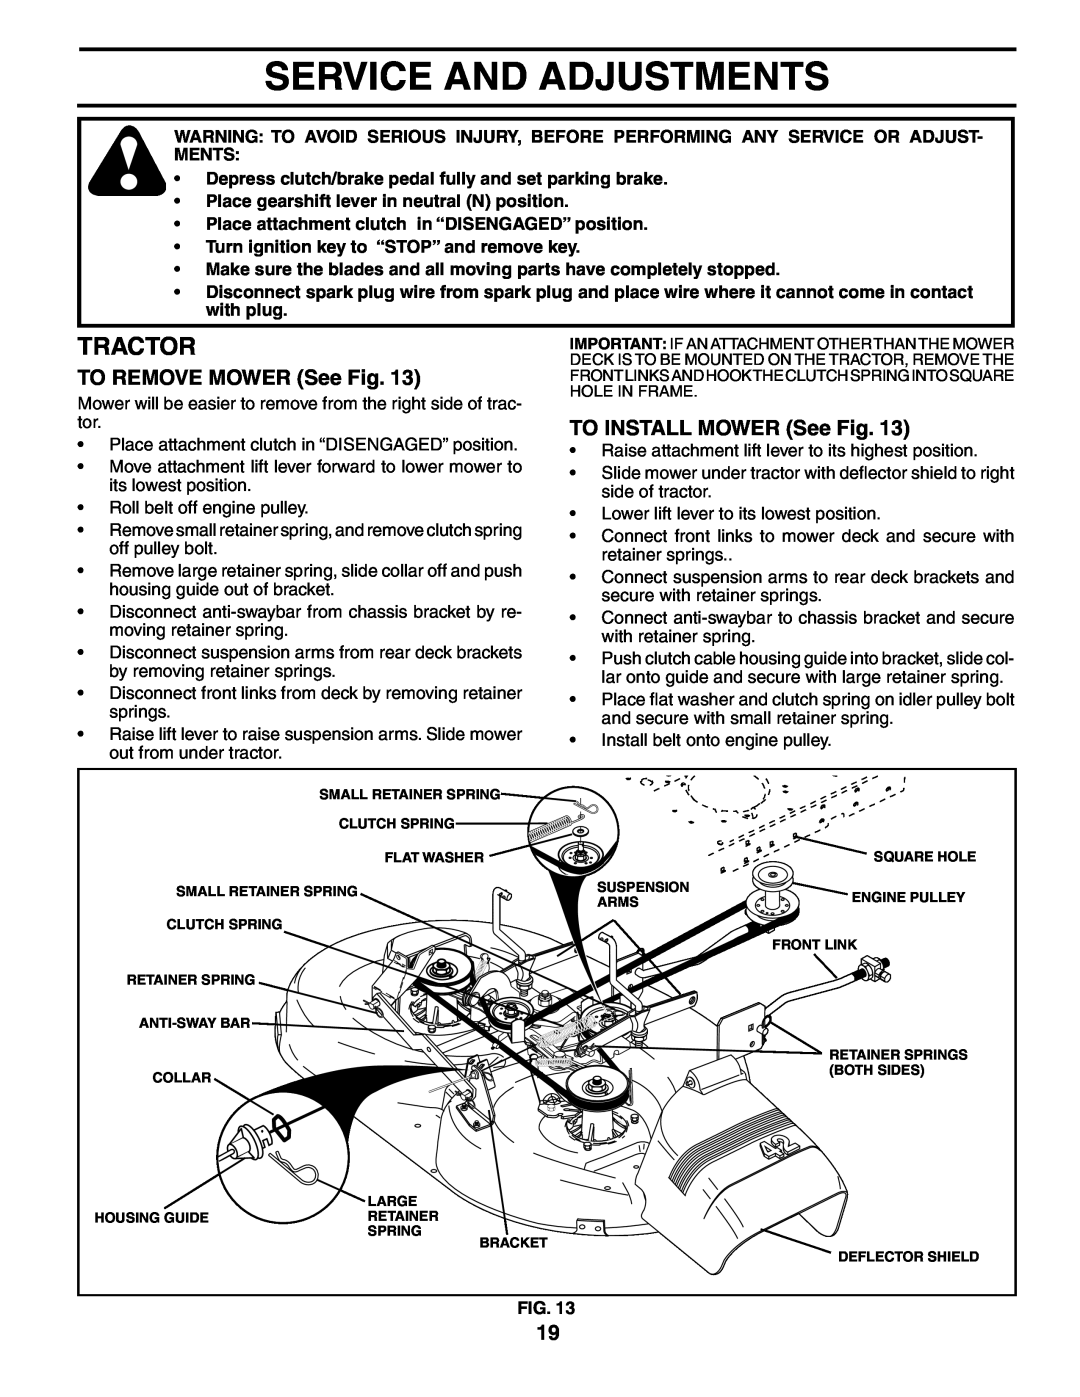 Poulan 194632 manual Service And Adjustments, TO REMOVE MOWER See Fig, TO INSTALL MOWER See Fig, Tractor 